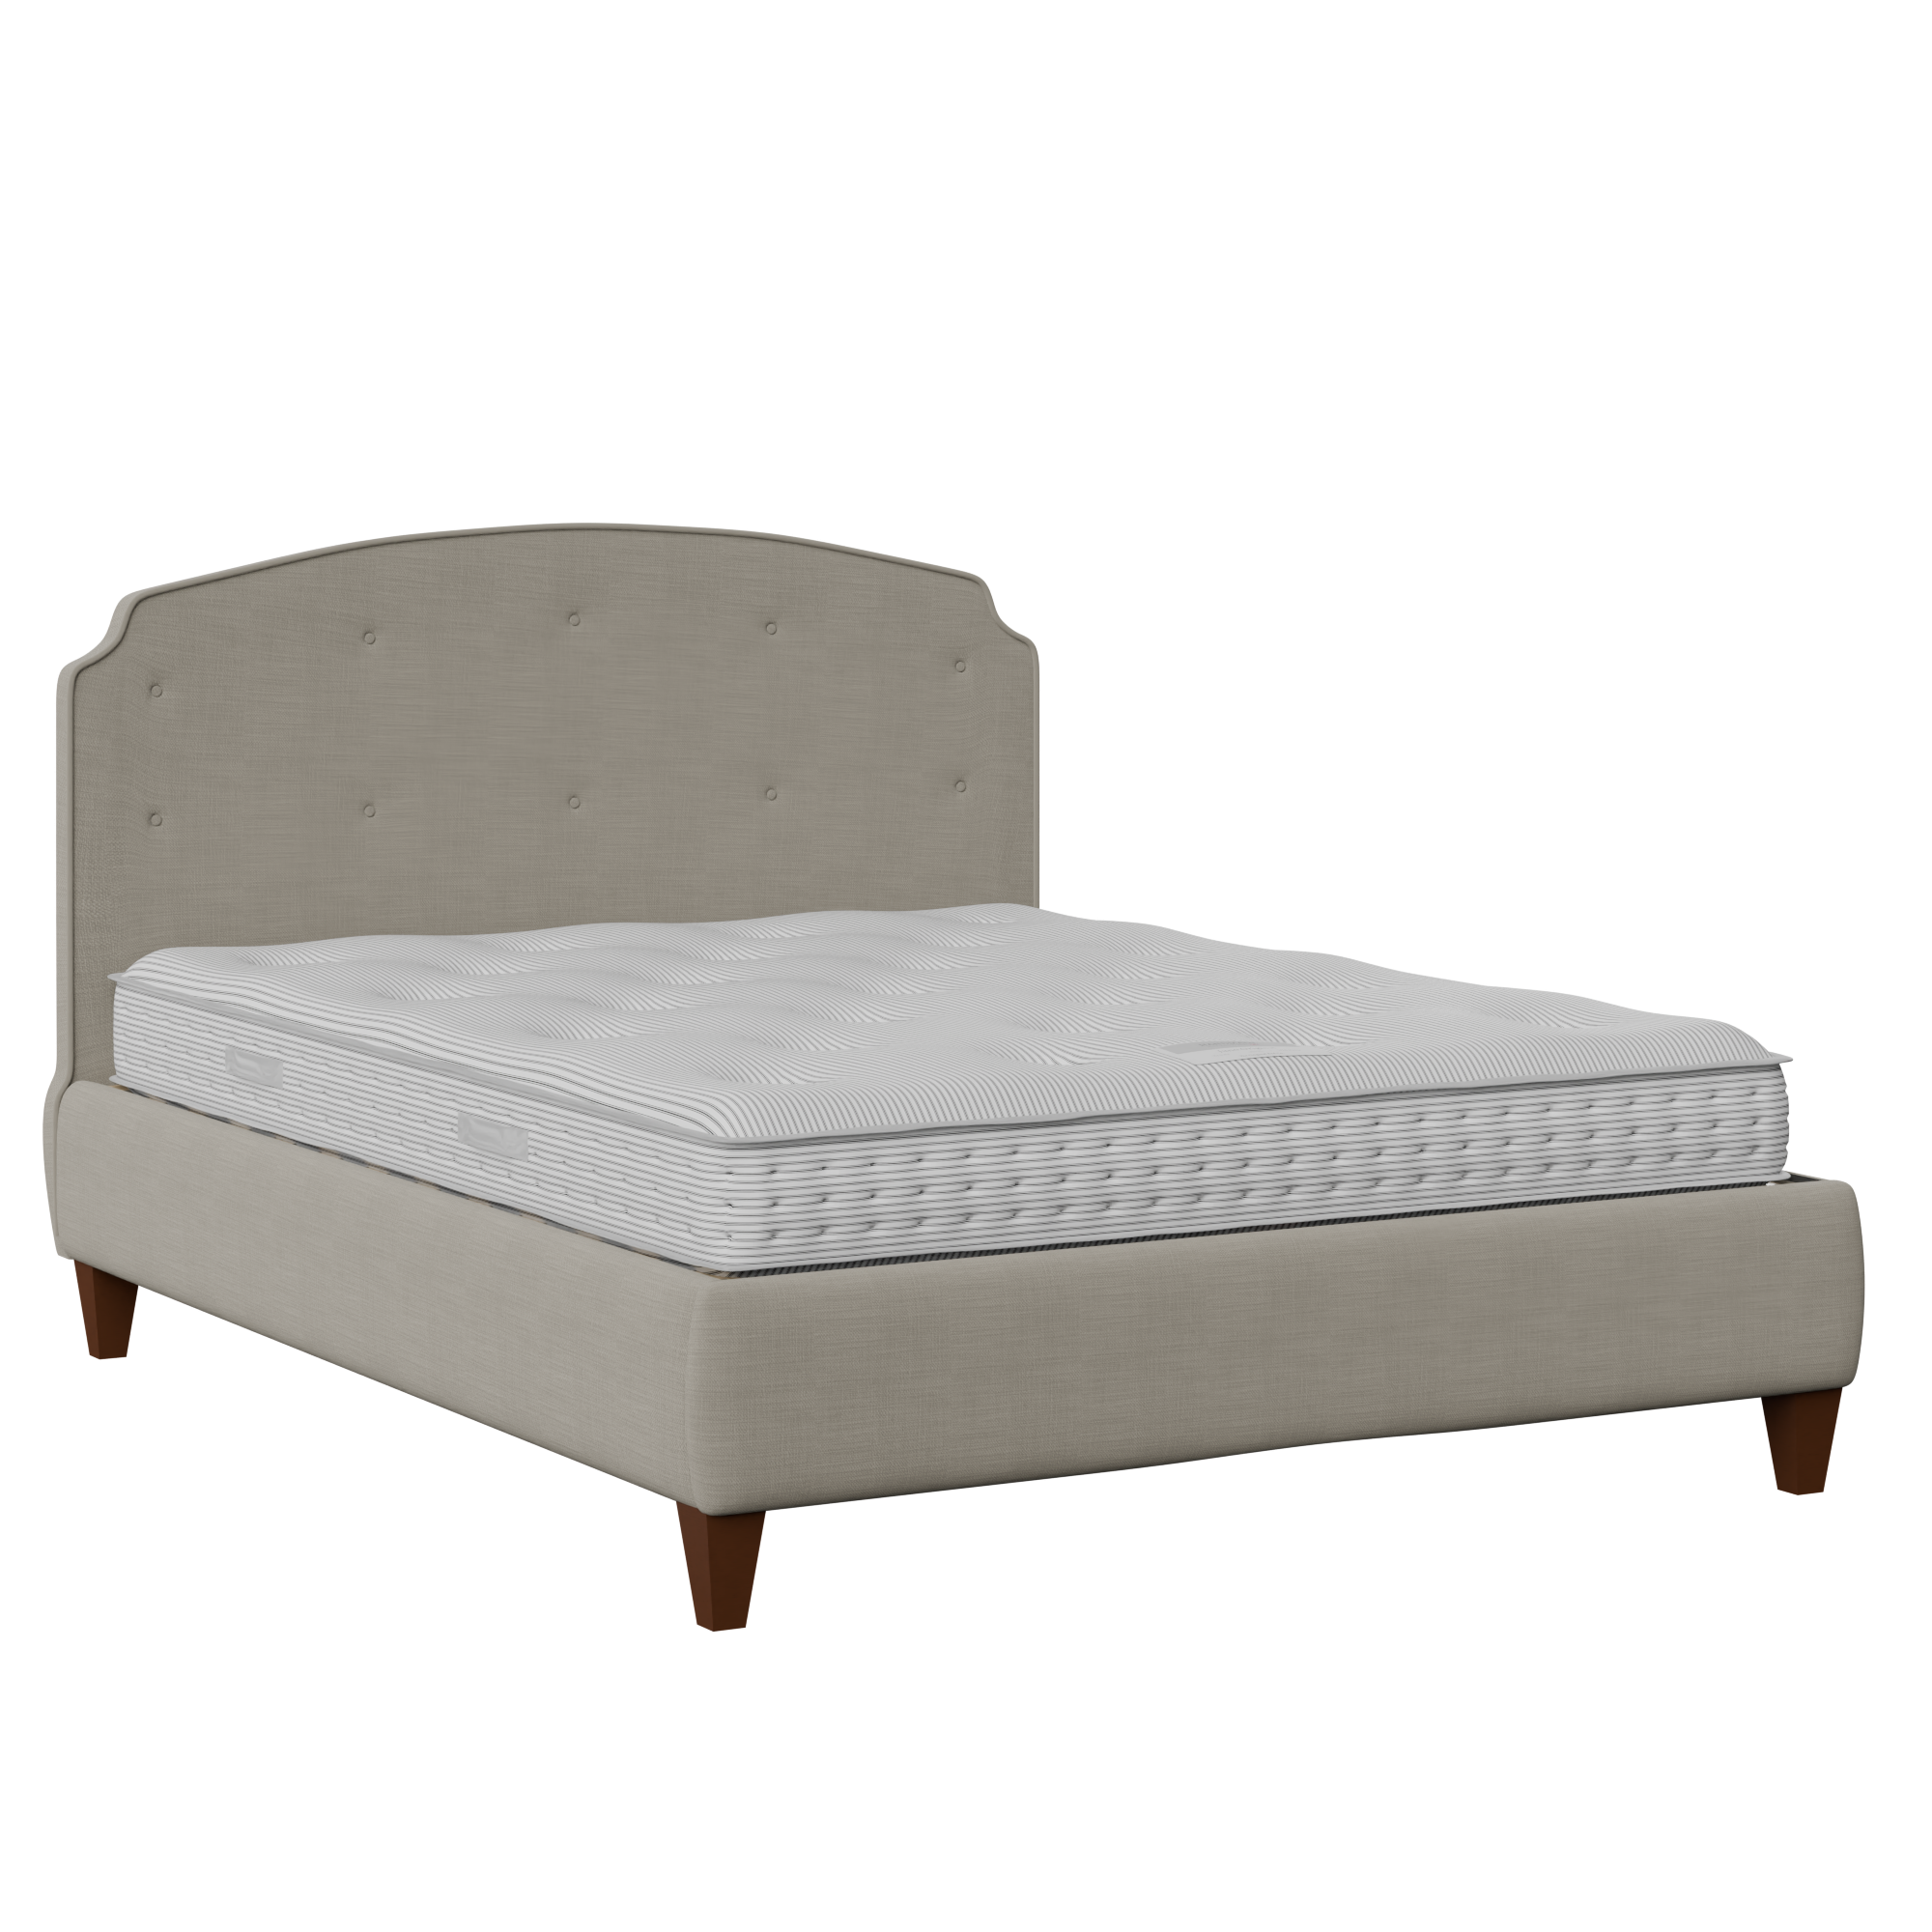 Lide Buttoned stoffen bed in grijs